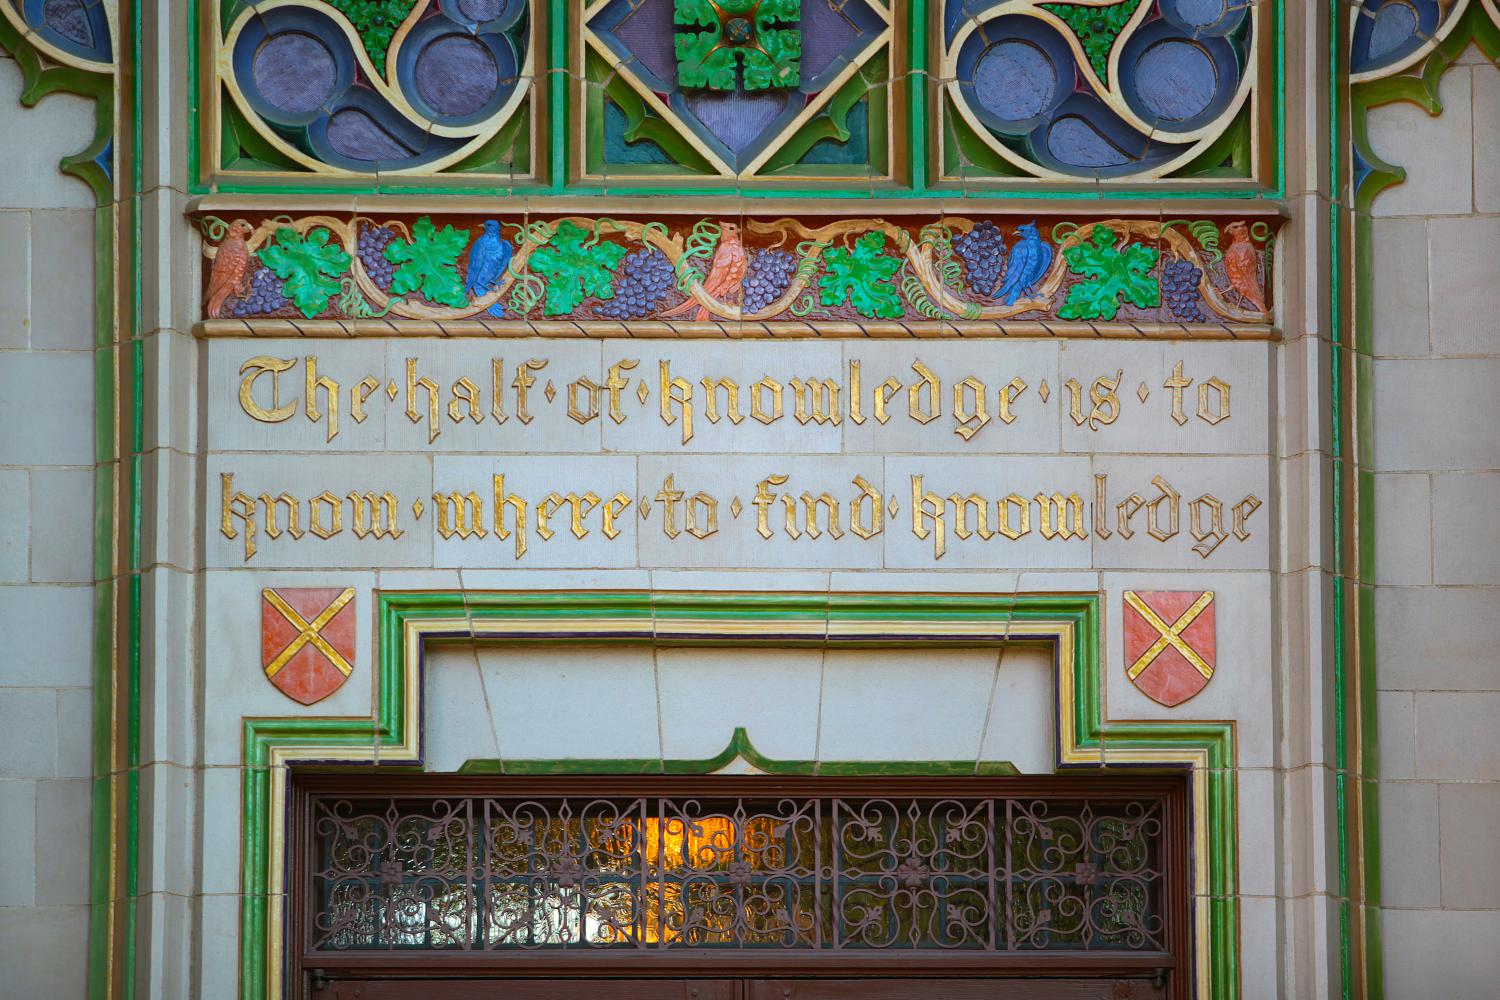 A golden inscription framed by artwork of songbirds and grapevines reads "The half of knowledge is to know where to find knowledge."